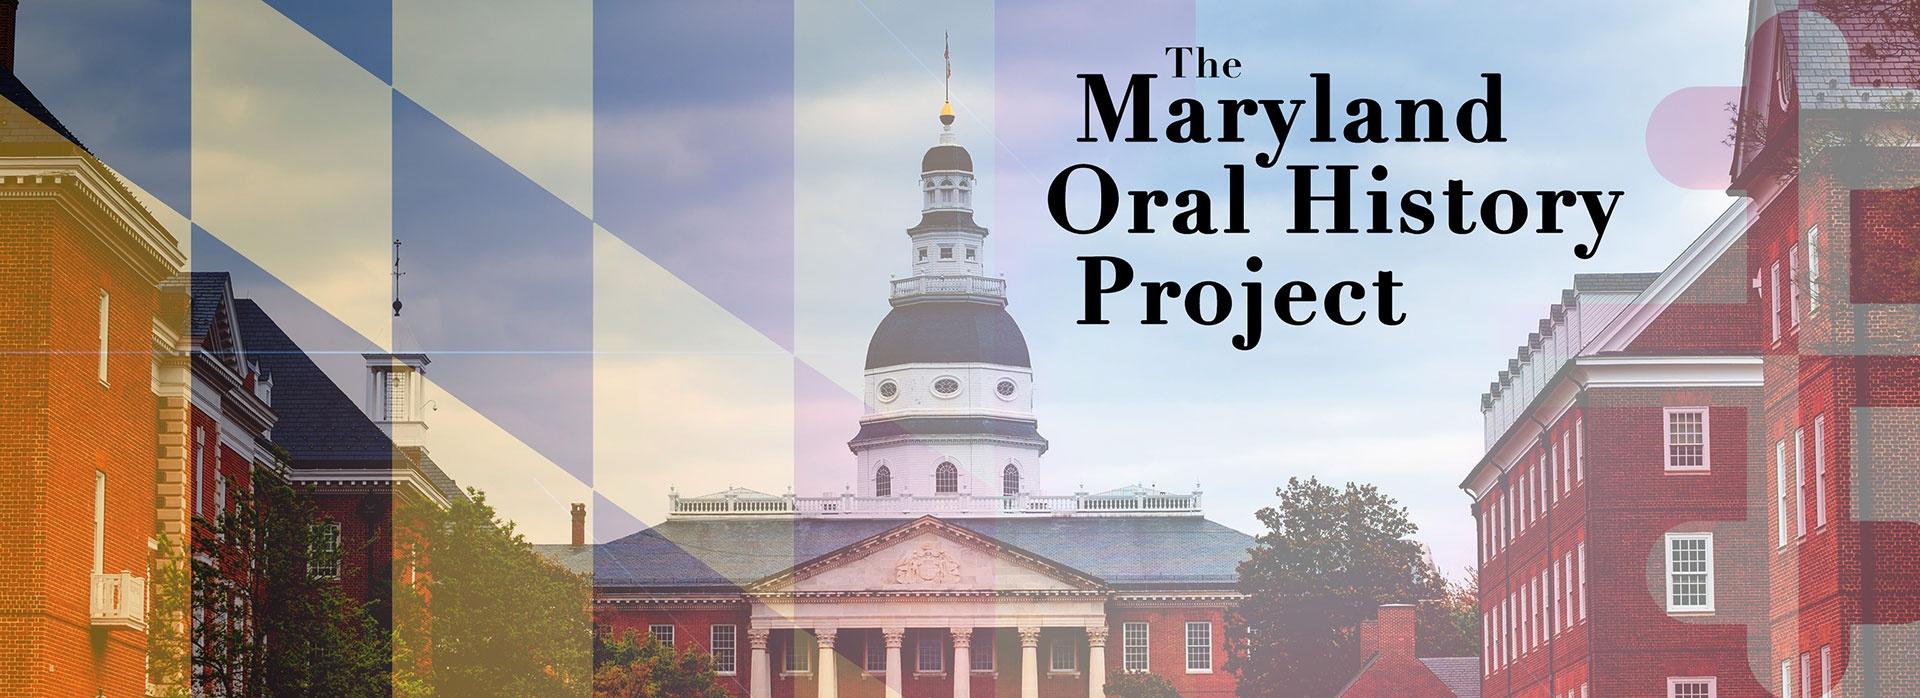 The Maryland Oral History Project